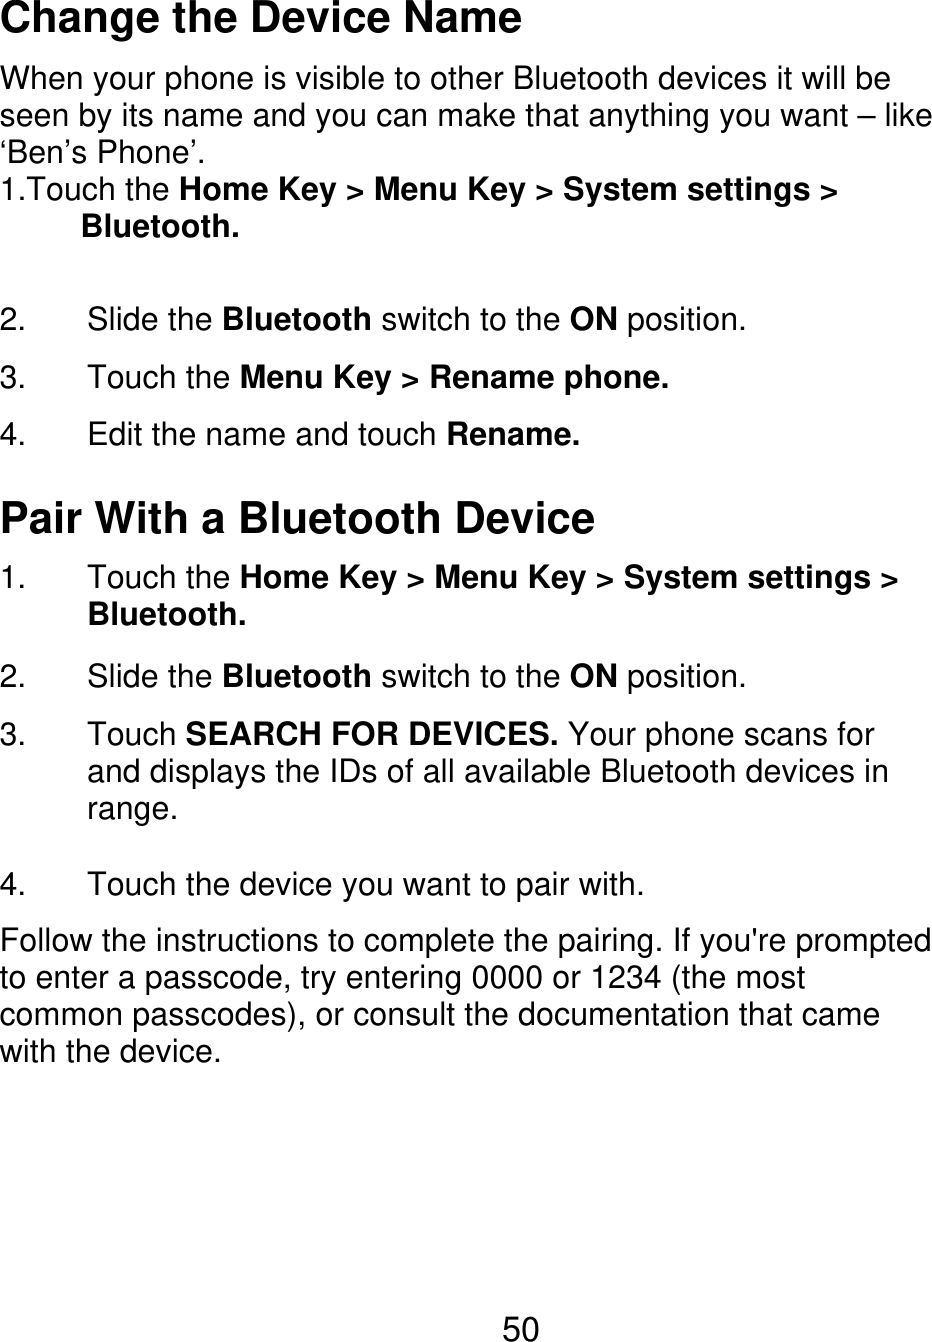 Change the Device Name When your phone is visible to other Bluetooth devices it will be seen by its name and you can make that anything you want – like ‘Ben’s Phone’. 1.Touch the Home Key &gt; Menu Key &gt; System settings &gt;      Bluetooth. 2. 3. 4. Slide the Bluetooth switch to the ON position. Touch the Menu Key &gt; Rename phone. Edit the name and touch Rename. Pair With a Bluetooth Device 1. 2. 3. Touch the Home Key &gt; Menu Key &gt; System settings &gt; Bluetooth. Slide the Bluetooth switch to the ON position. Touch SEARCH FOR DEVICES. Your phone scans for and displays the IDs of all available Bluetooth devices in range. Touch the device you want to pair with. 4. Follow the instructions to complete the pairing. If you&apos;re prompted to enter a passcode, try entering 0000 or 1234 (the most common passcodes), or consult the documentation that came with the device. 50 